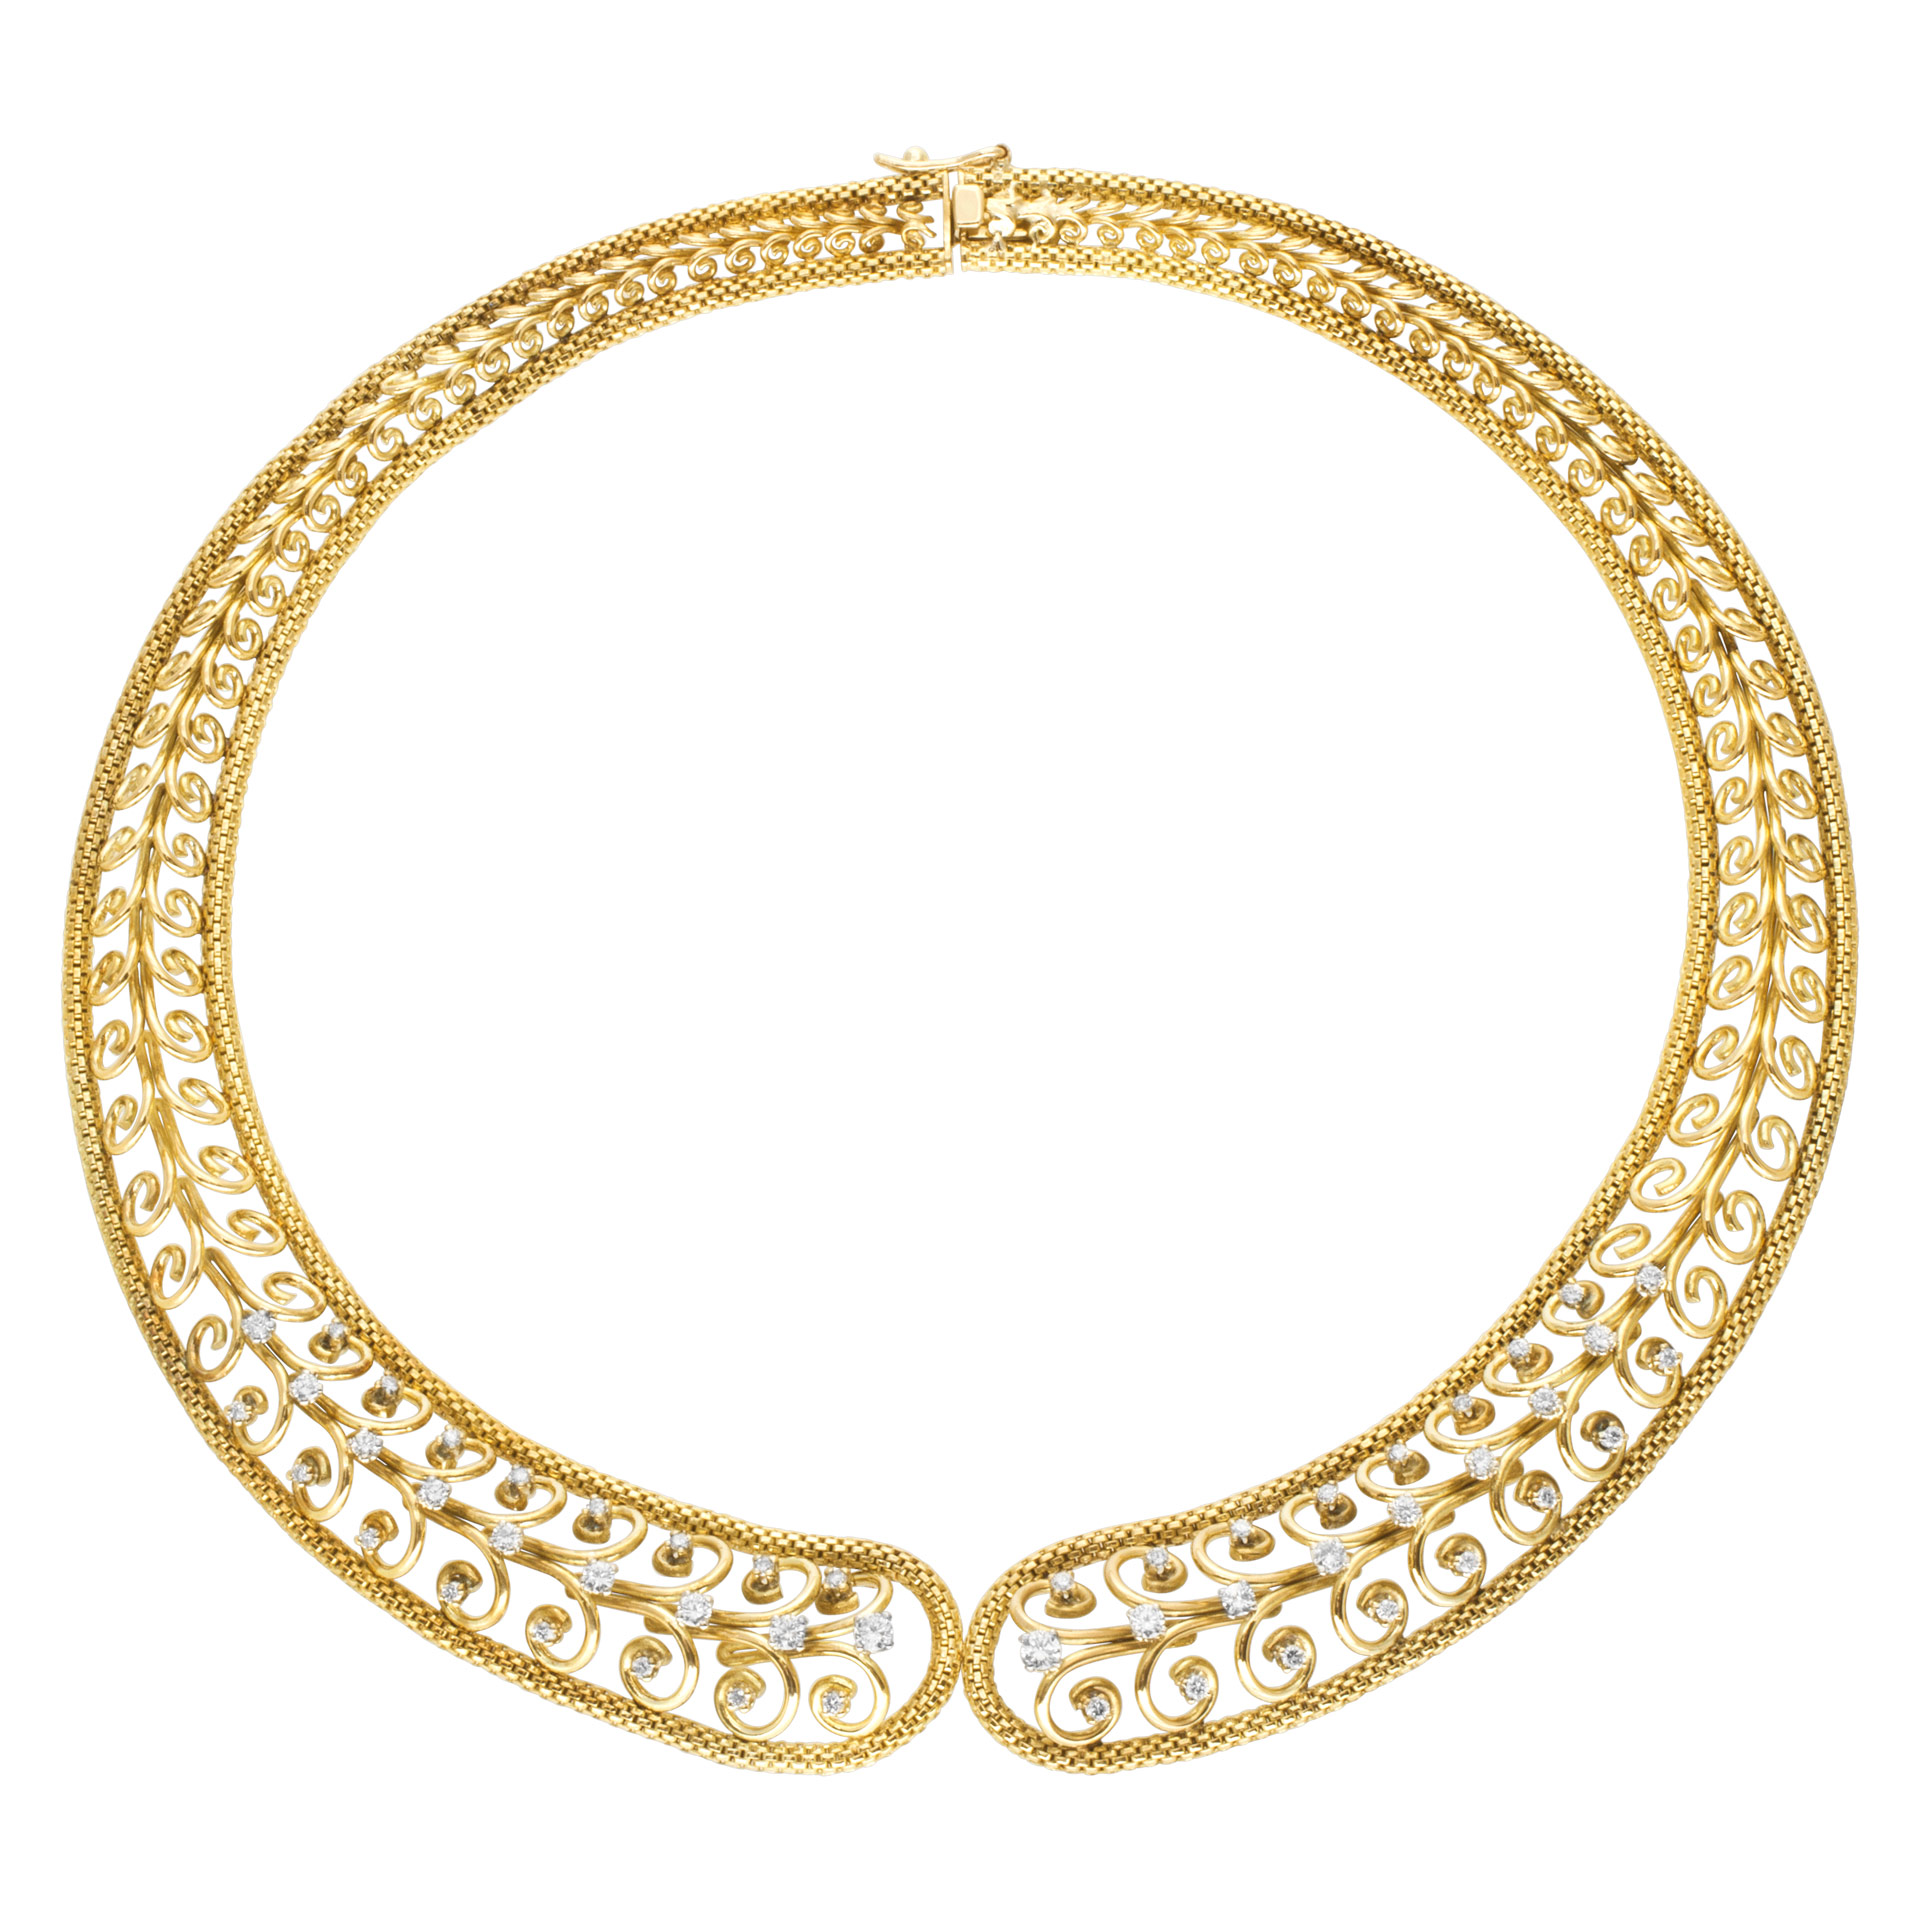 Swirl link choker necklace with diamond accents in 18k (Stones) image 1